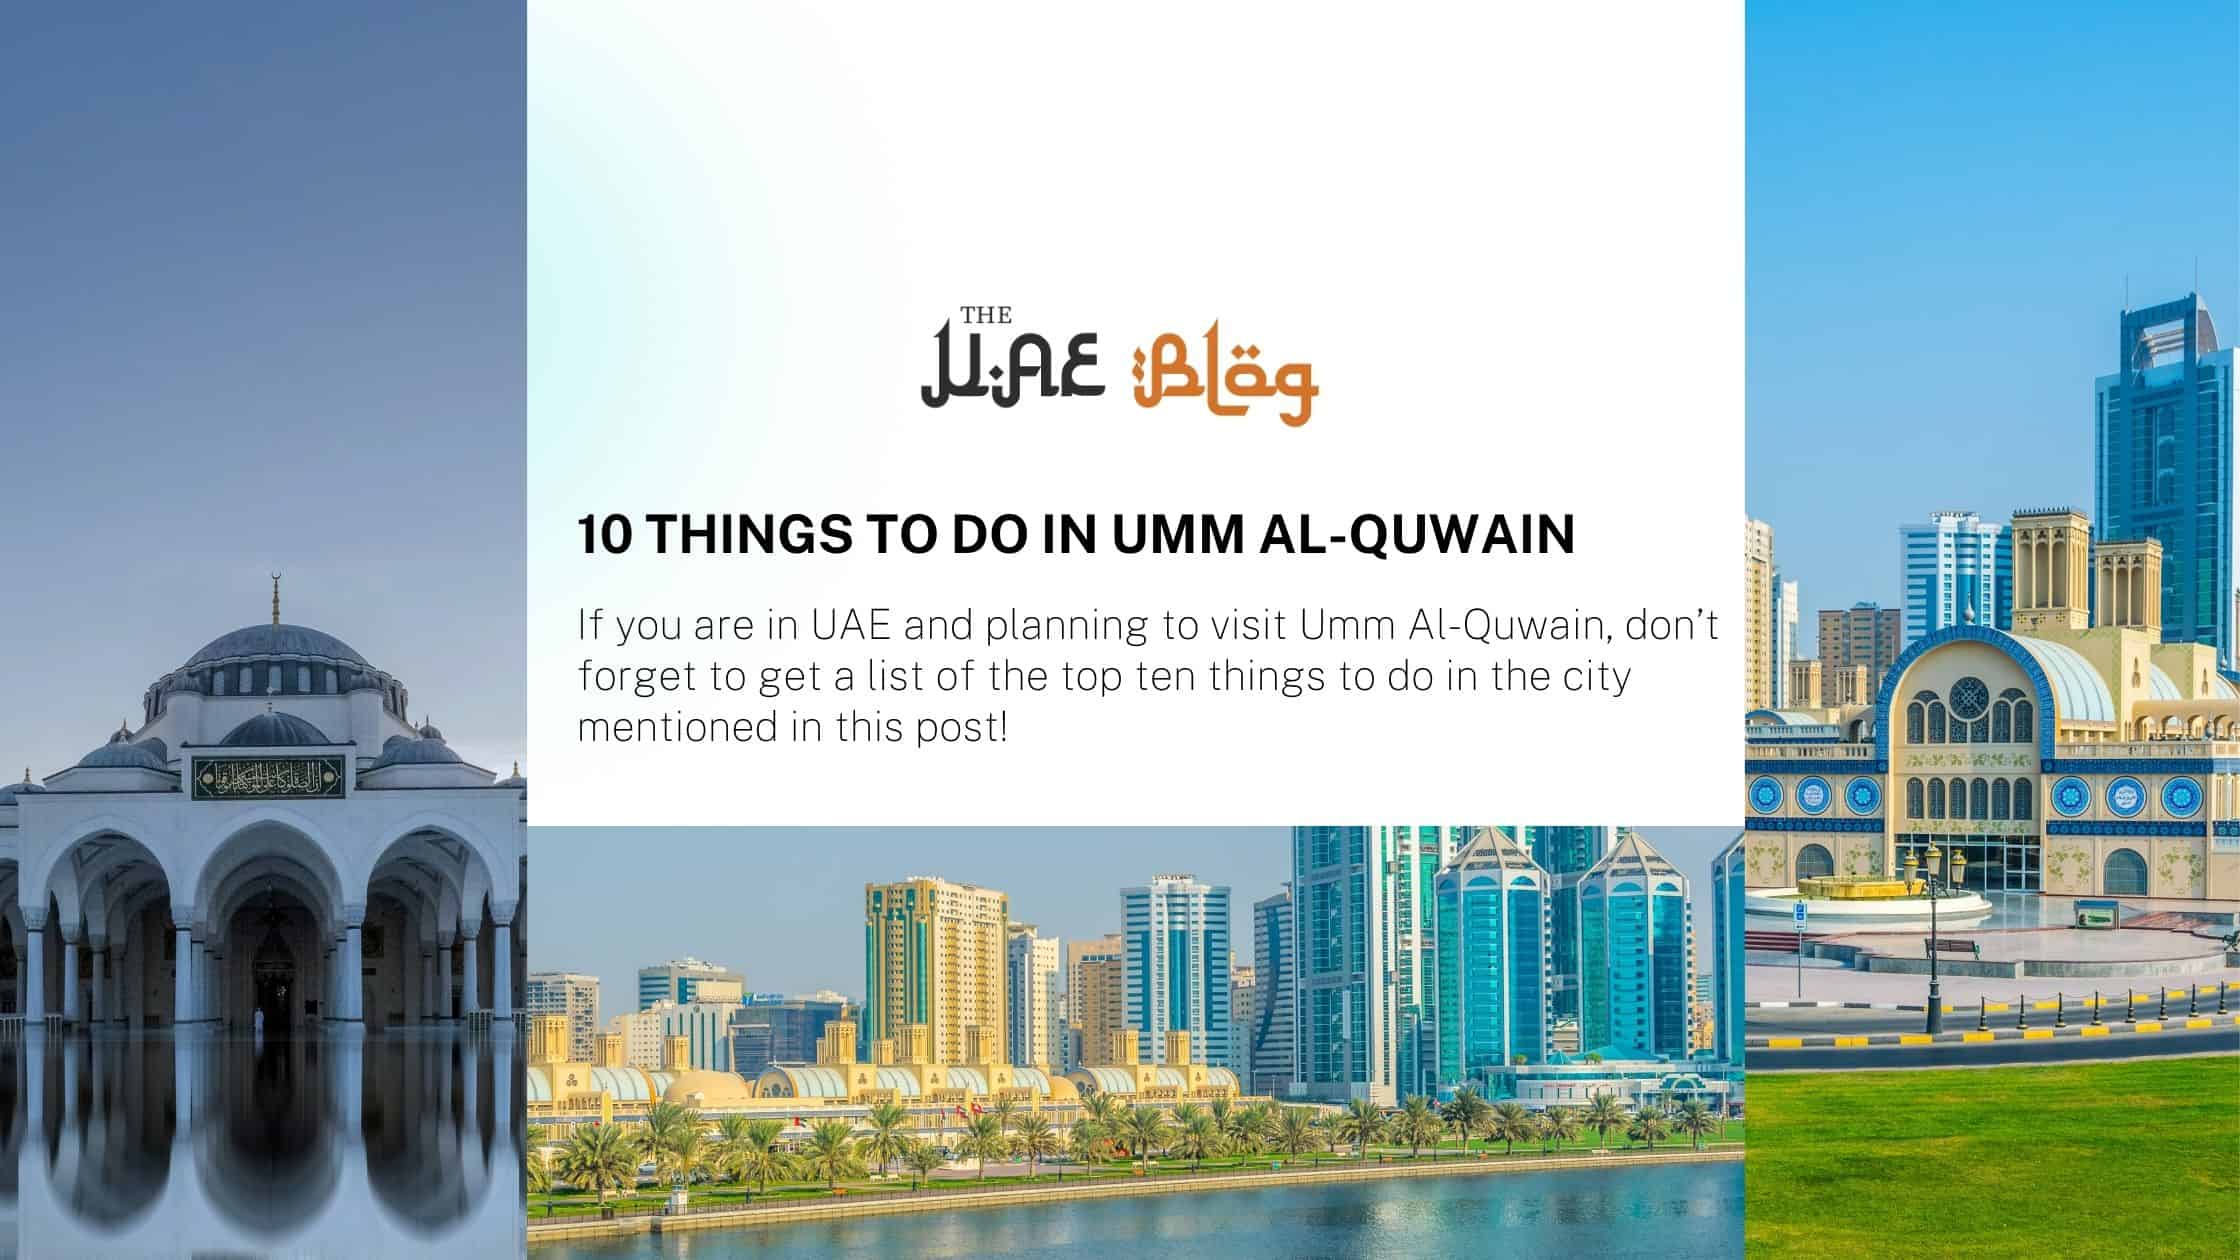 10 things to do in Umm Al-Quwain